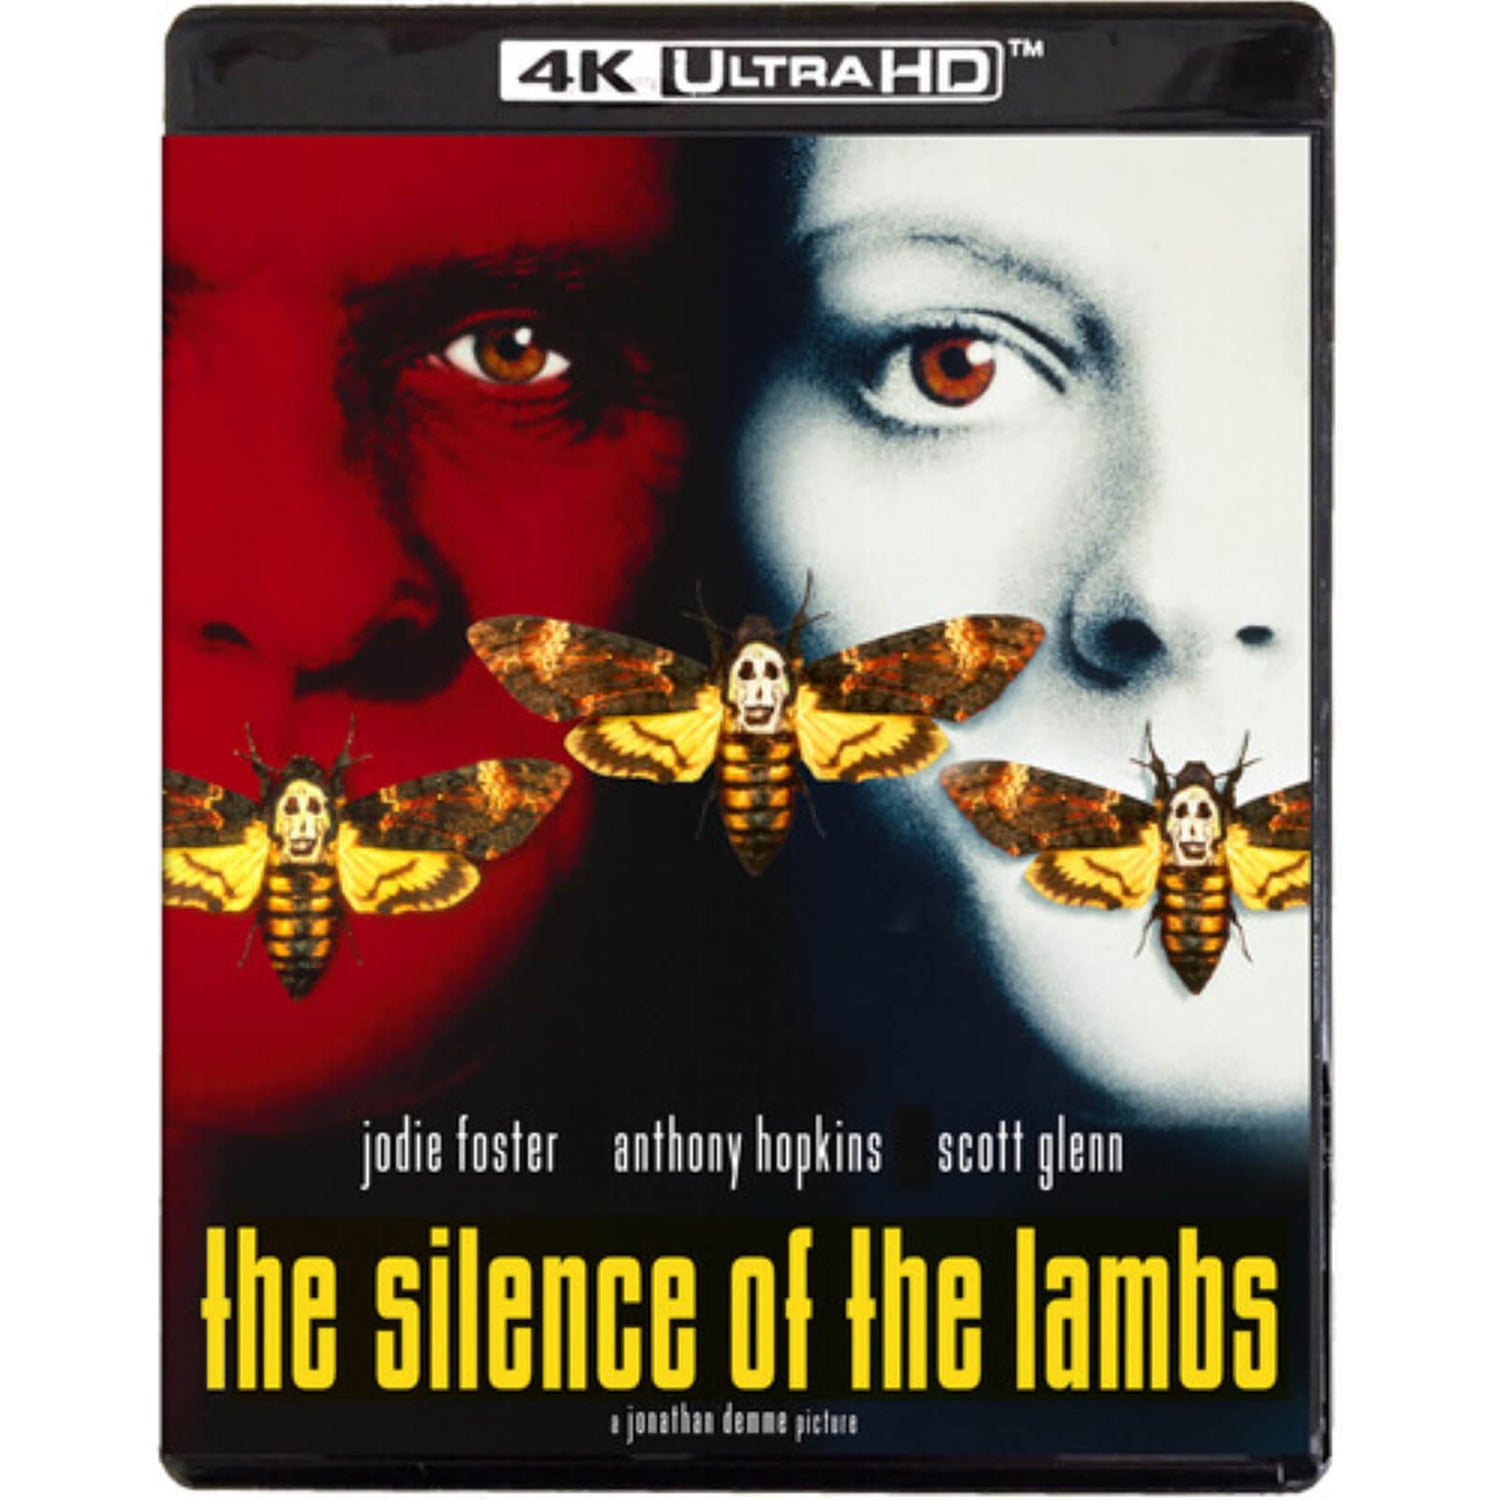 The Silence of the Lambs - 4K Ultra HD (Includes Blu-ray) (US Import)